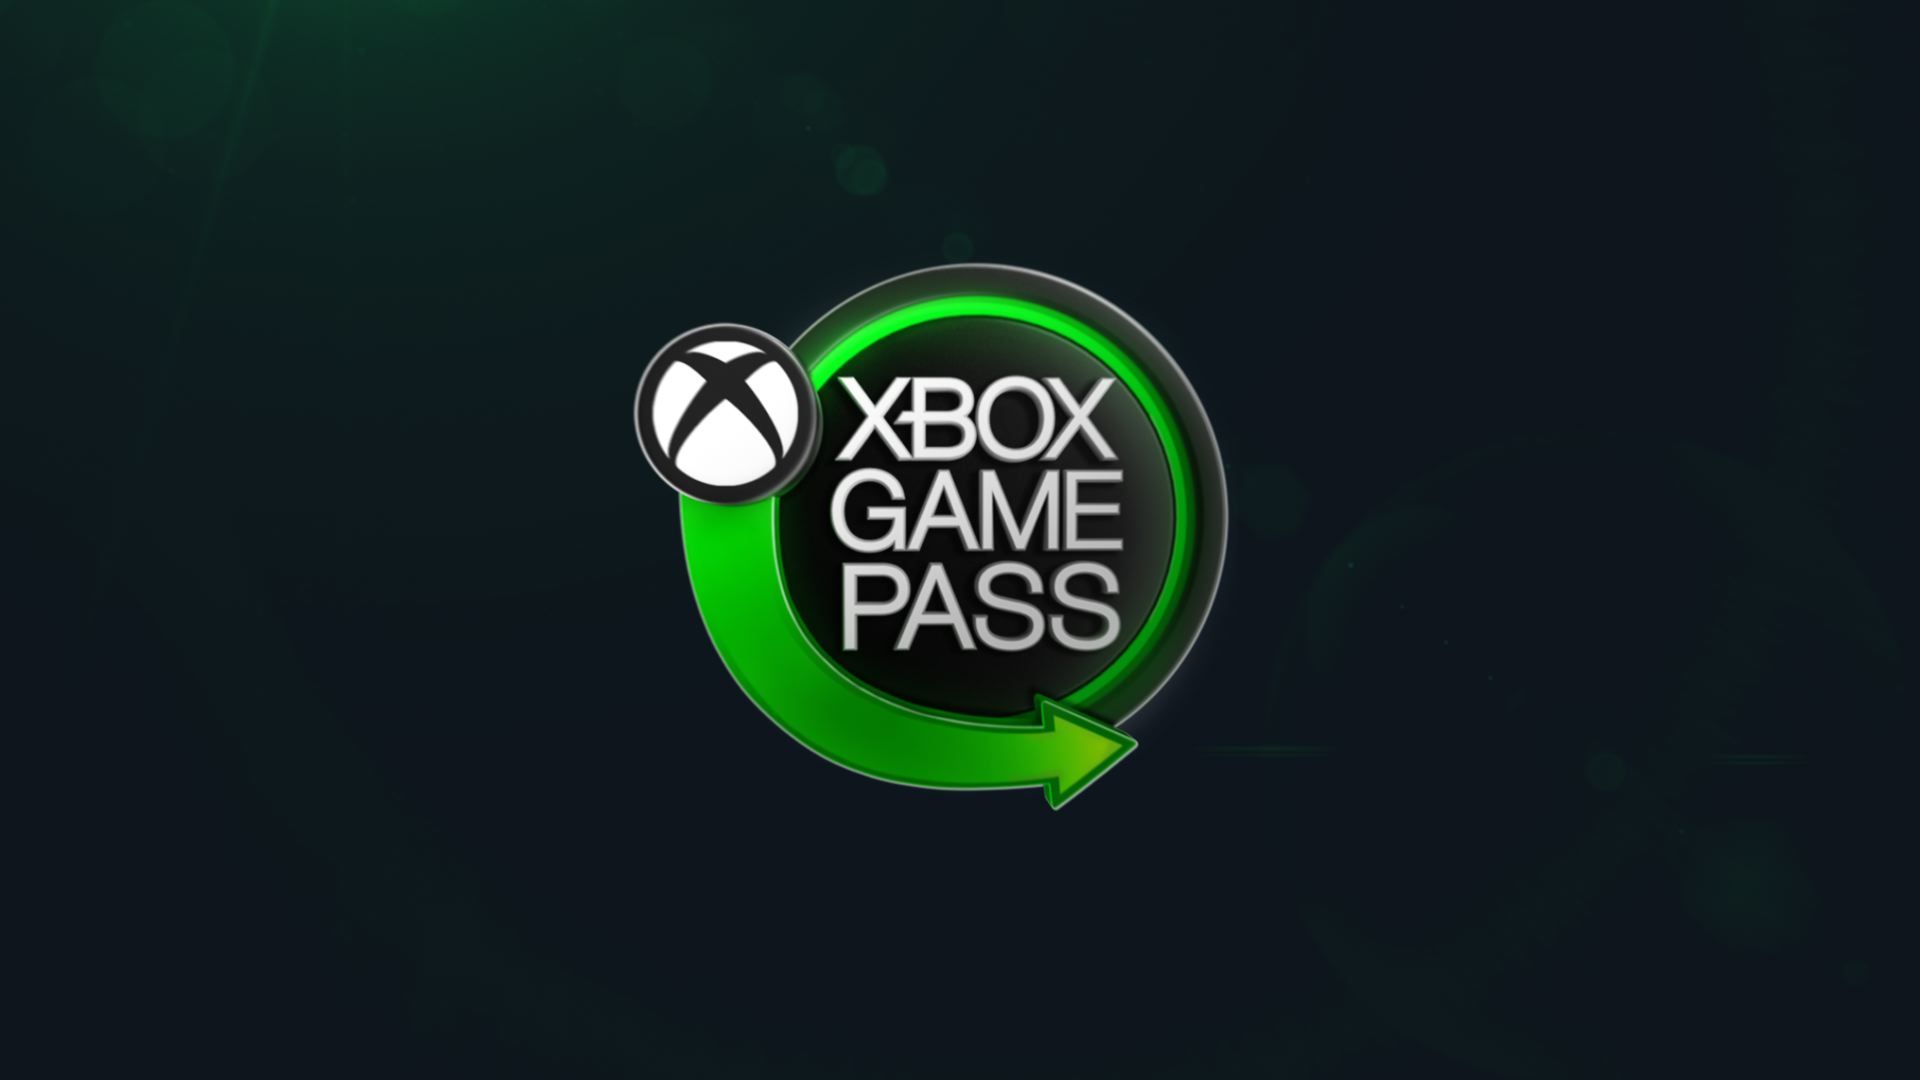 Microsoft’s Phil Spencer Hints On A Big Game Pass Announcement Coming Soon – Halo Infinite Not Released Properly